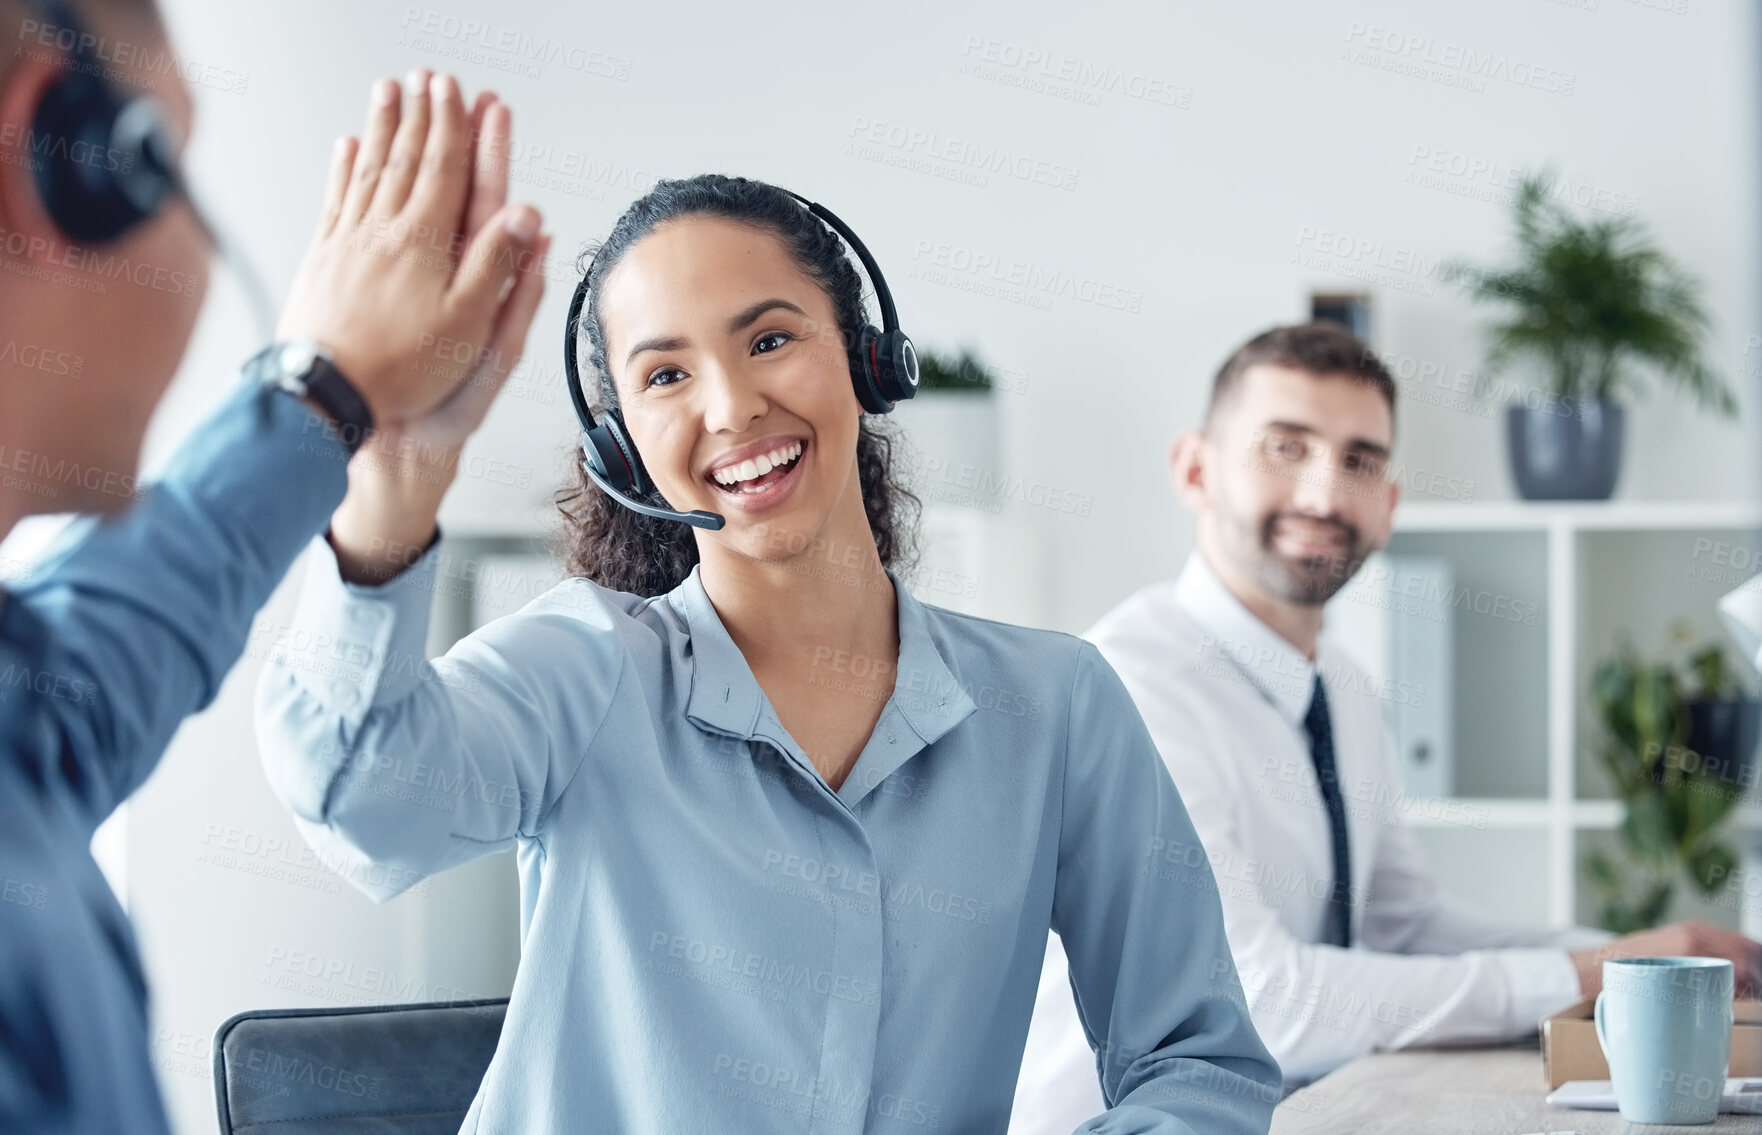 Buy stock photo Shot of two call centre agents giving each other a high five in an office